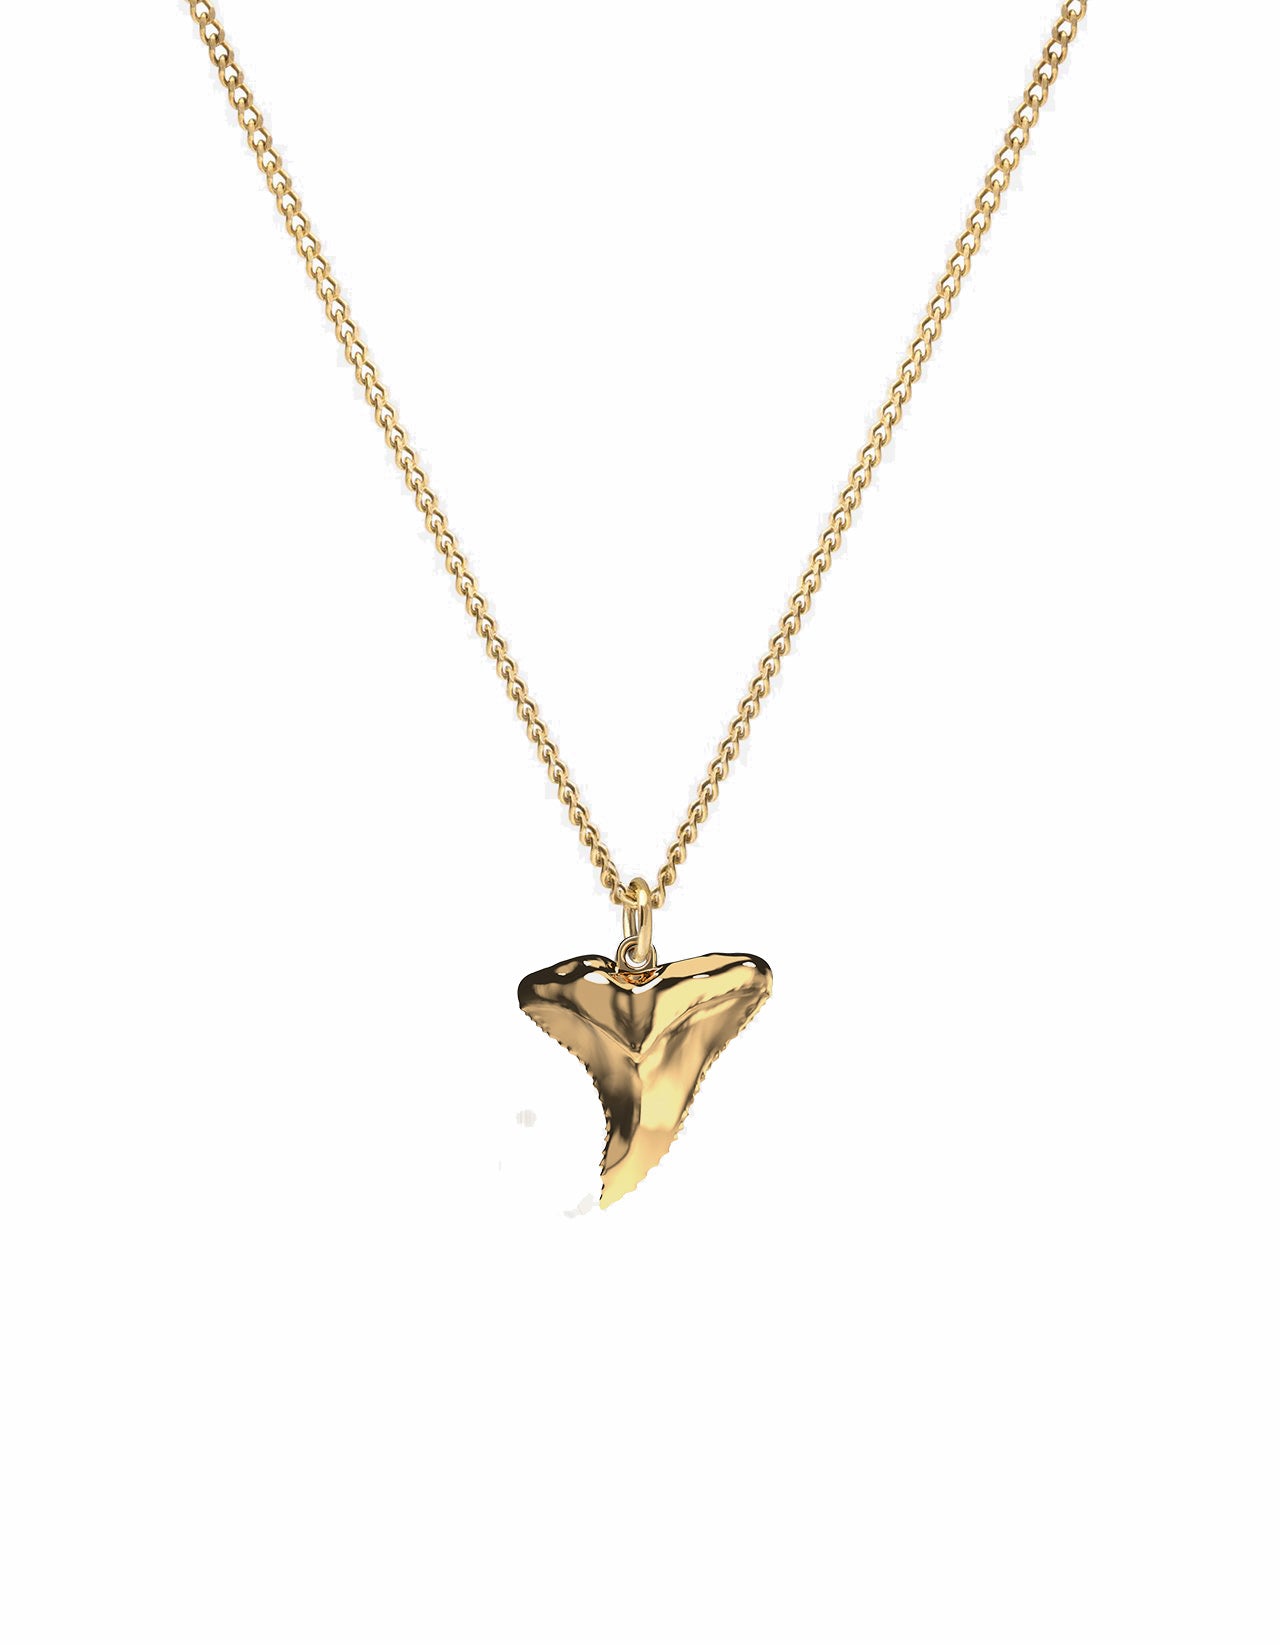 Shark Tooth Pendant Gold GOLD VERMEIL
Navigate life head-on with the protection of our Shark Tooth Pendant Necklace. Made in polished gold vermeil and hangs on a 24-inch chain. MIANSAI